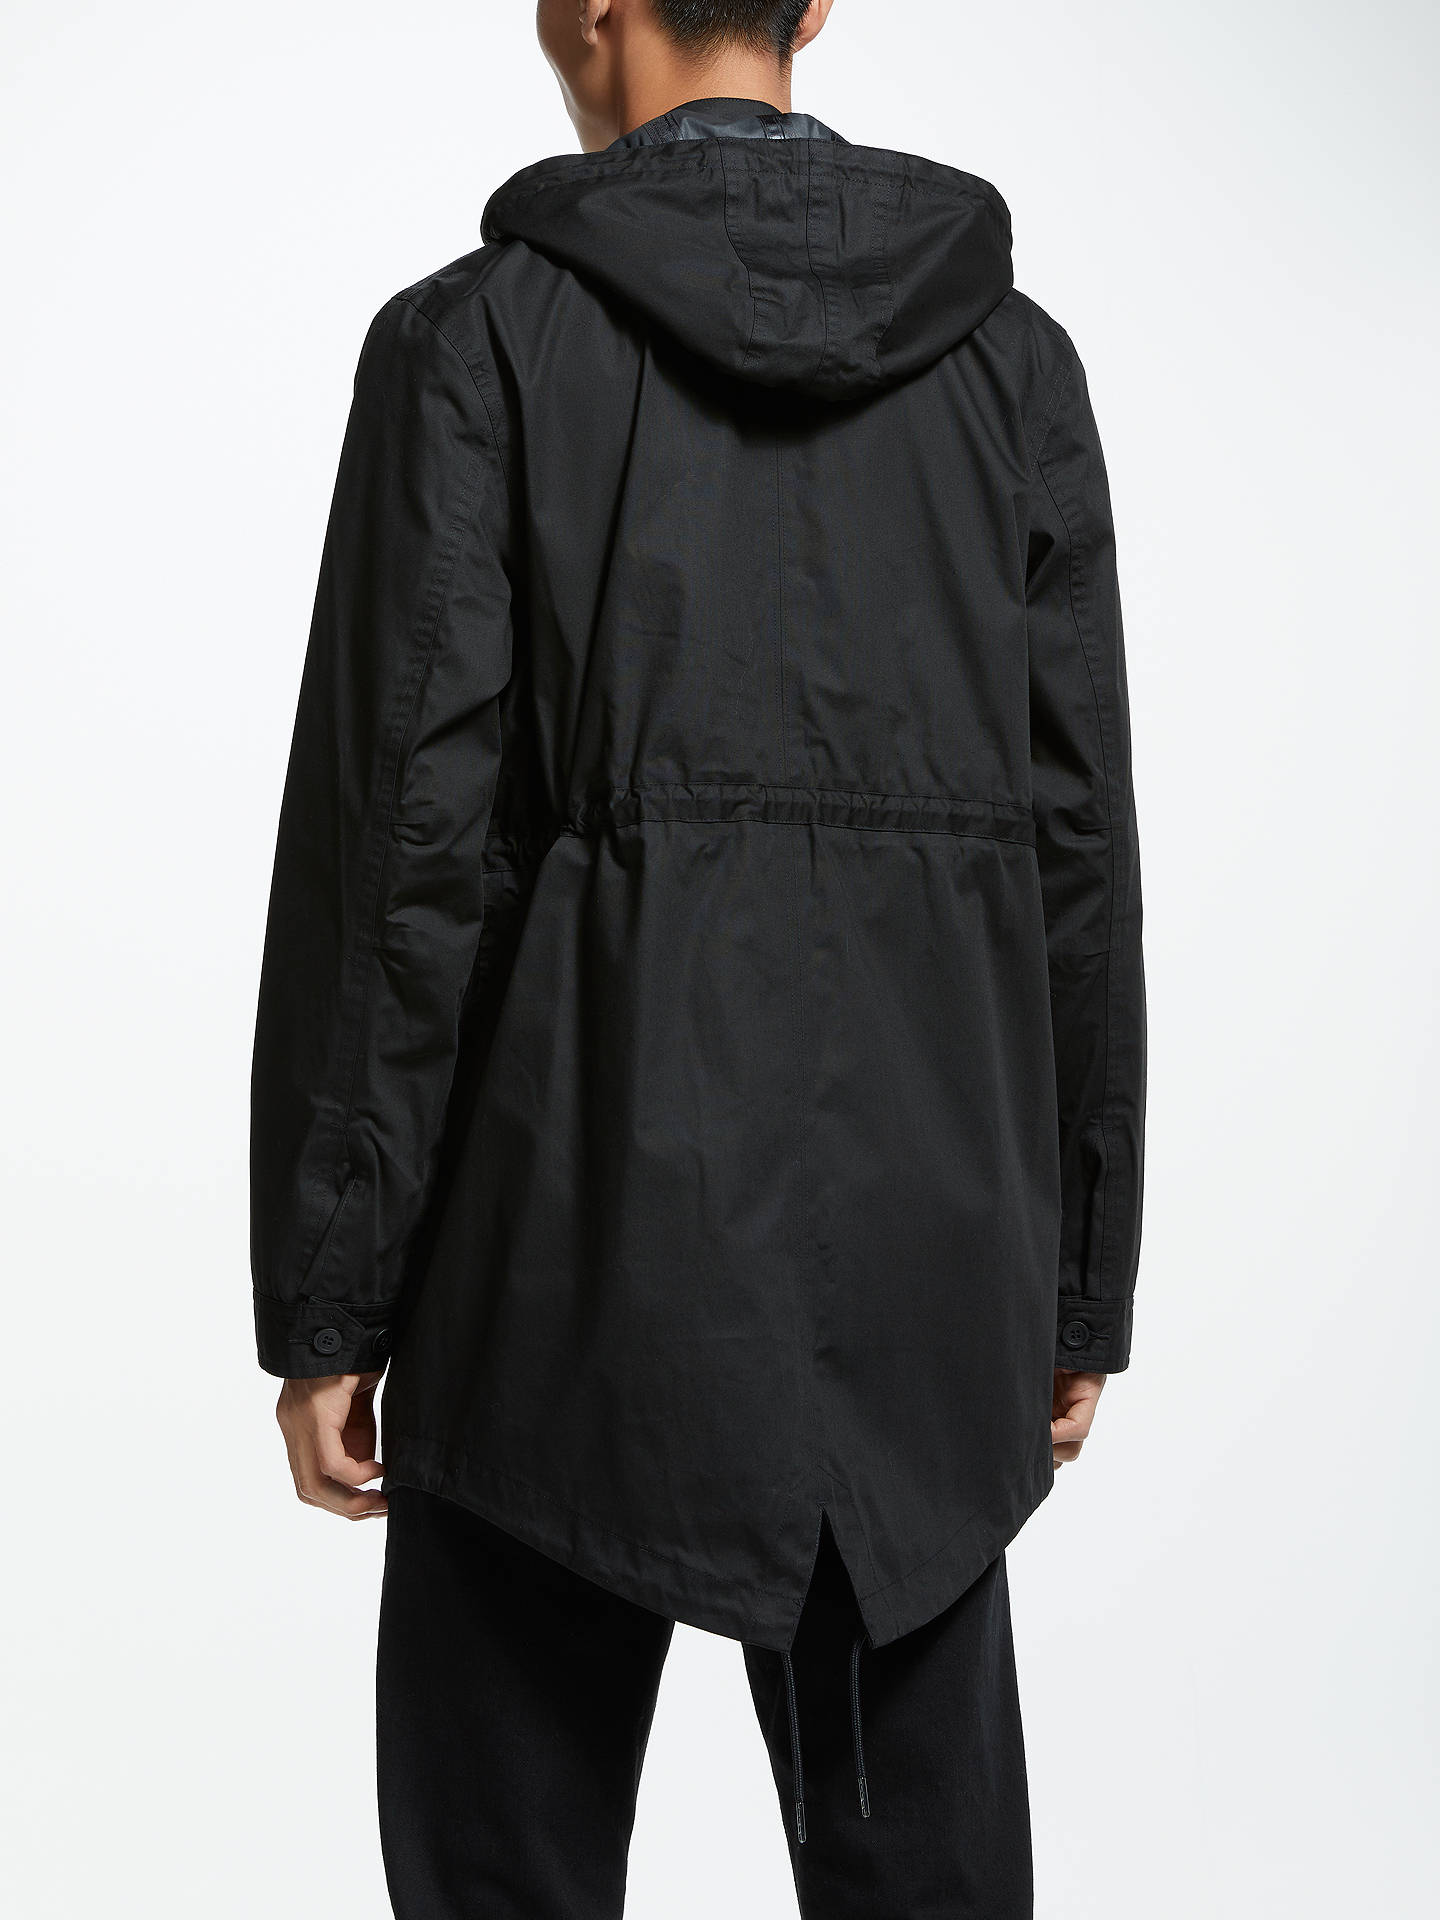 Fred Perry Fishtail Parka Black Coats & Jackets Clothes, Shoes ...